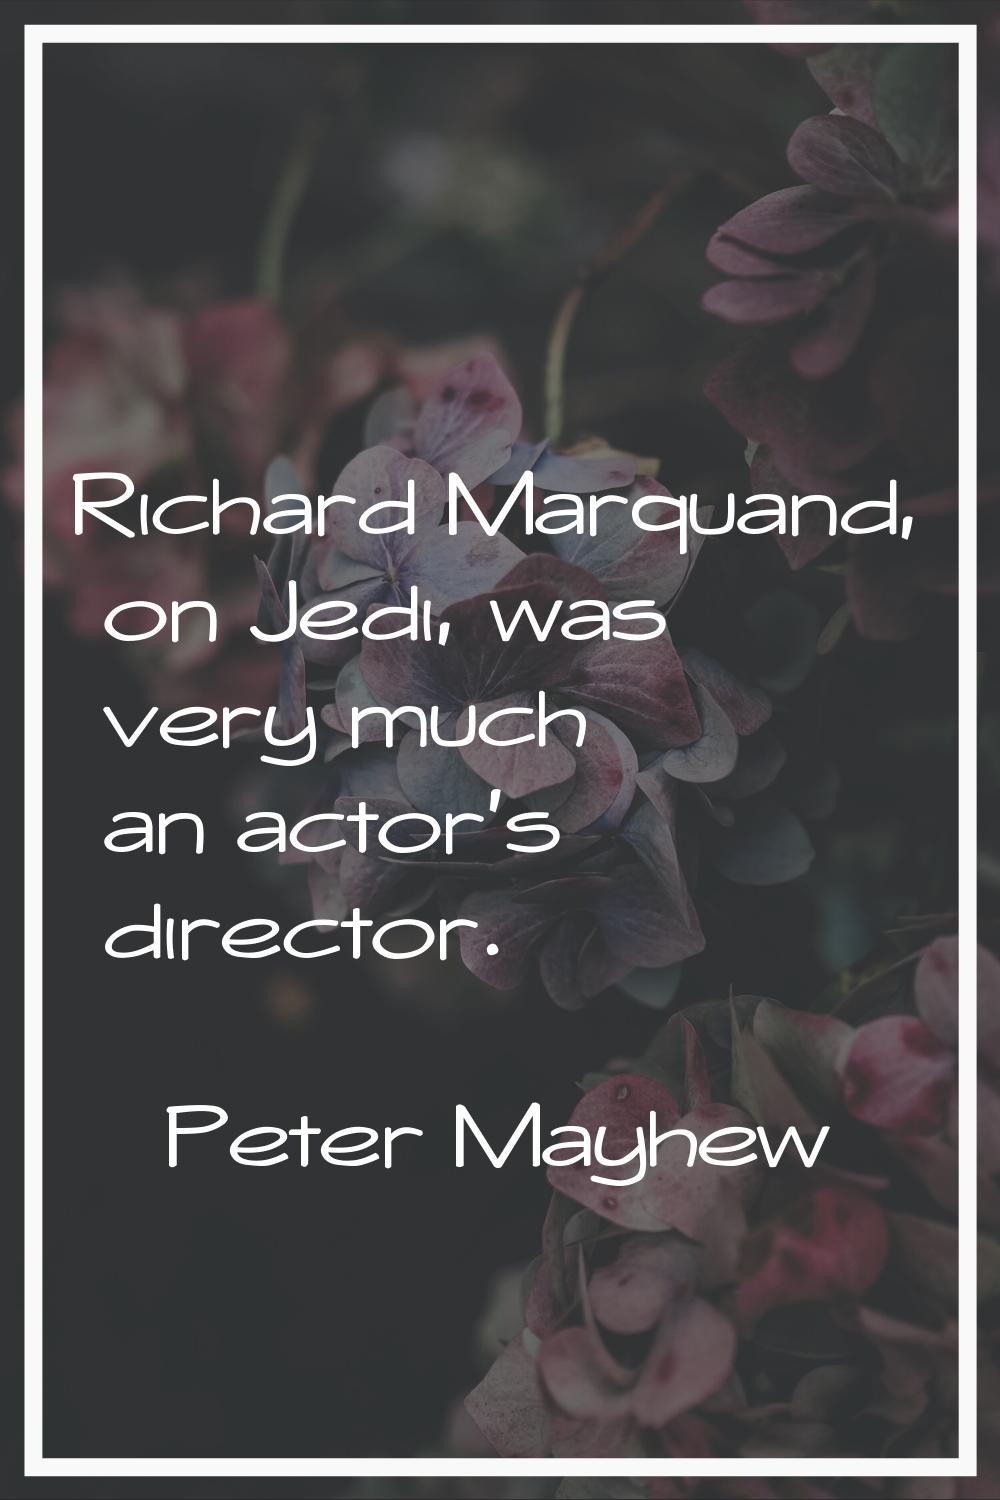 Richard Marquand, on Jedi, was very much an actor's director.